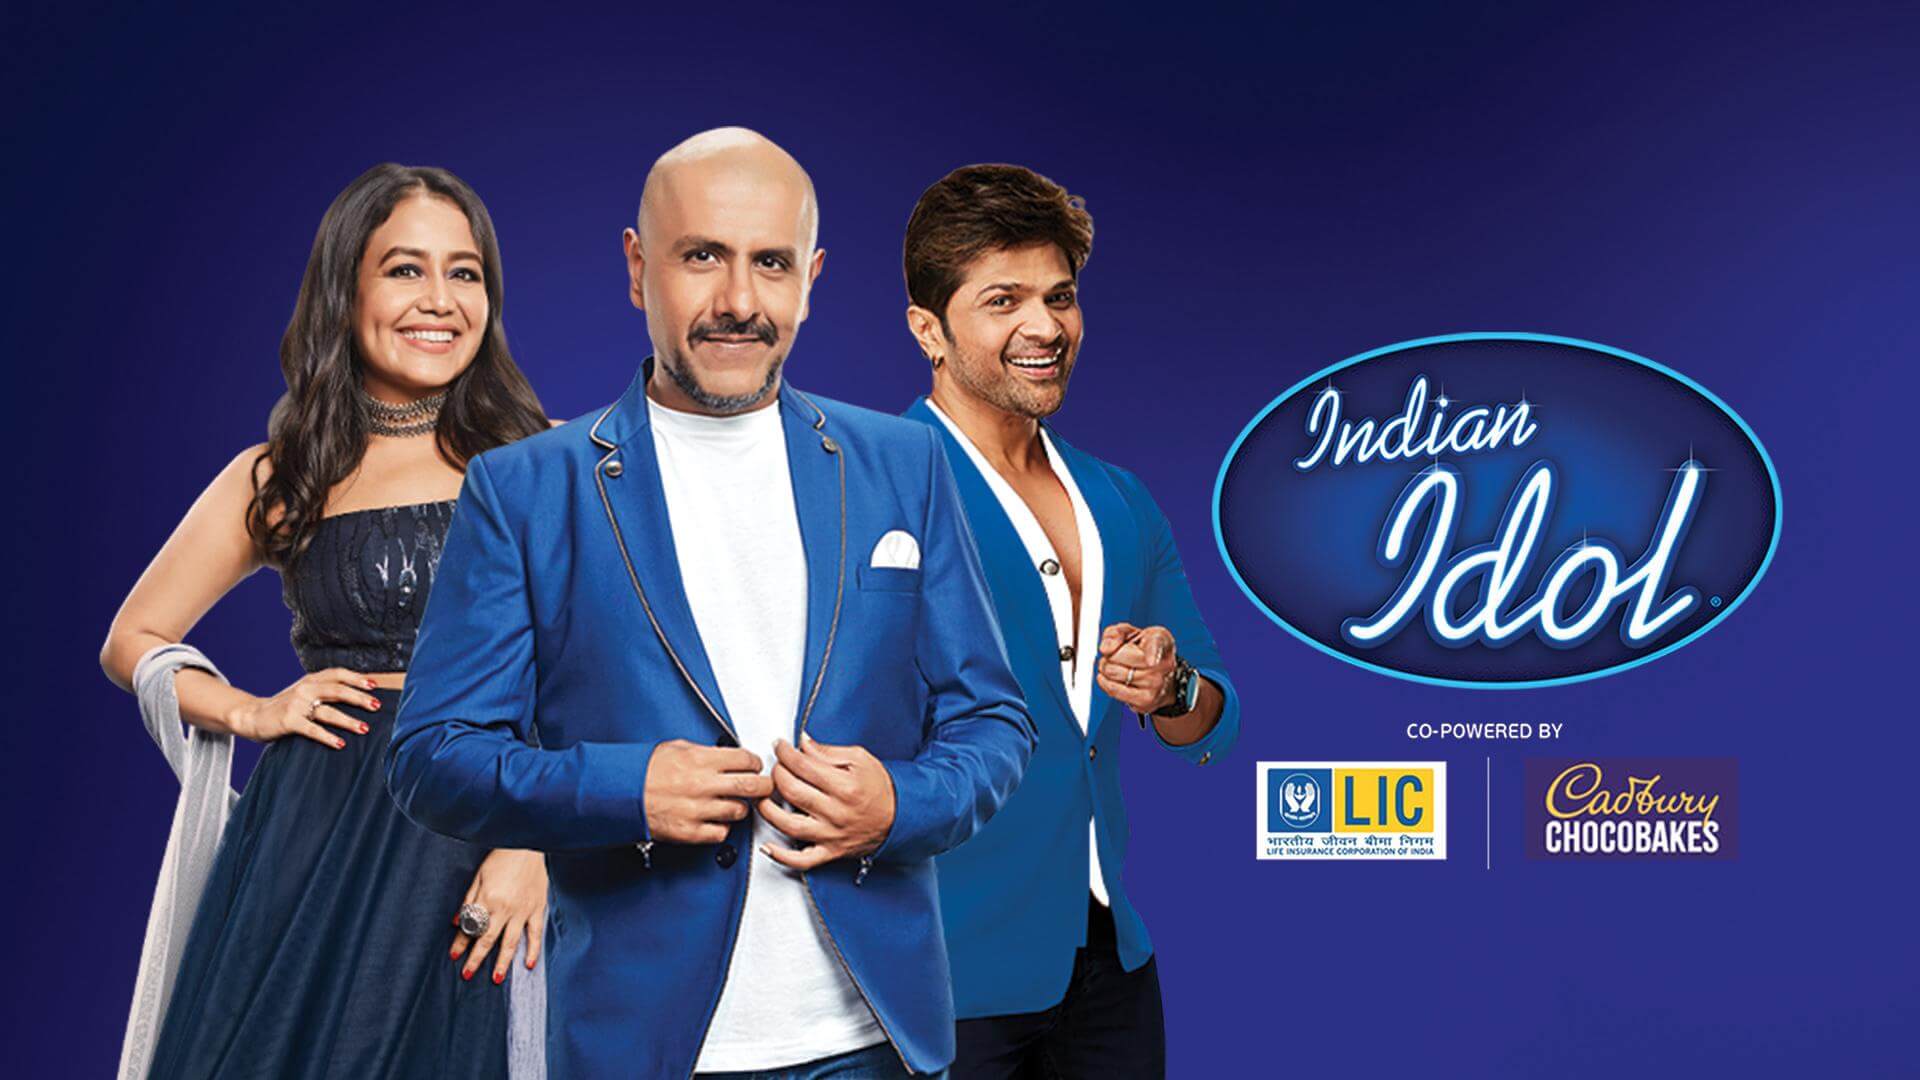 How to Register for Indian Idol Season 13 Auditions » Amazfeed